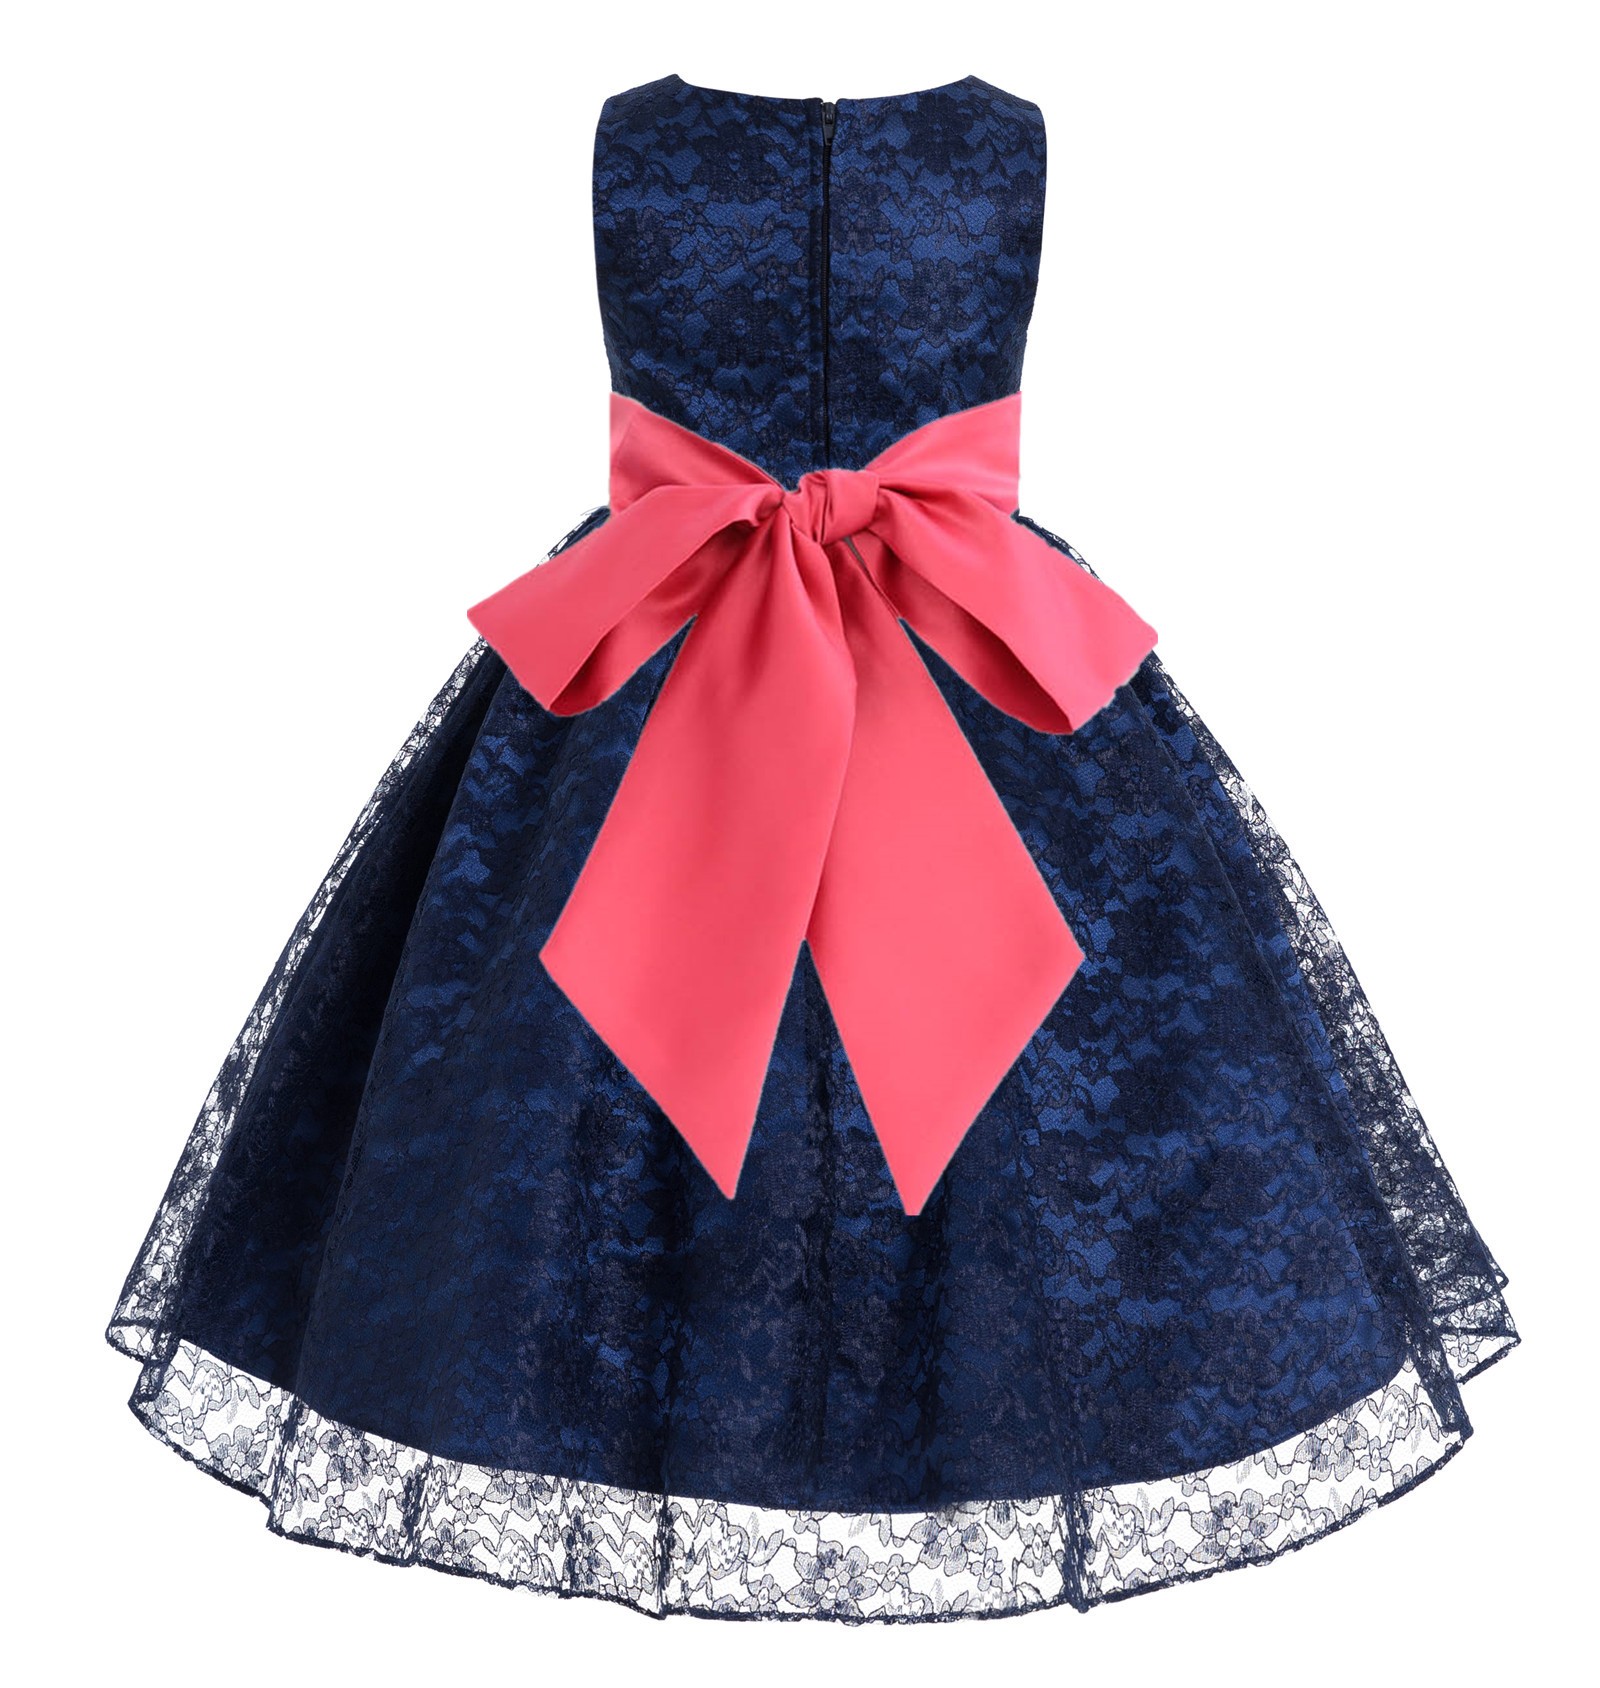 Navy / Watermelon Floral Lace Overlay Flower Girl Dress Lace Dresses 163s